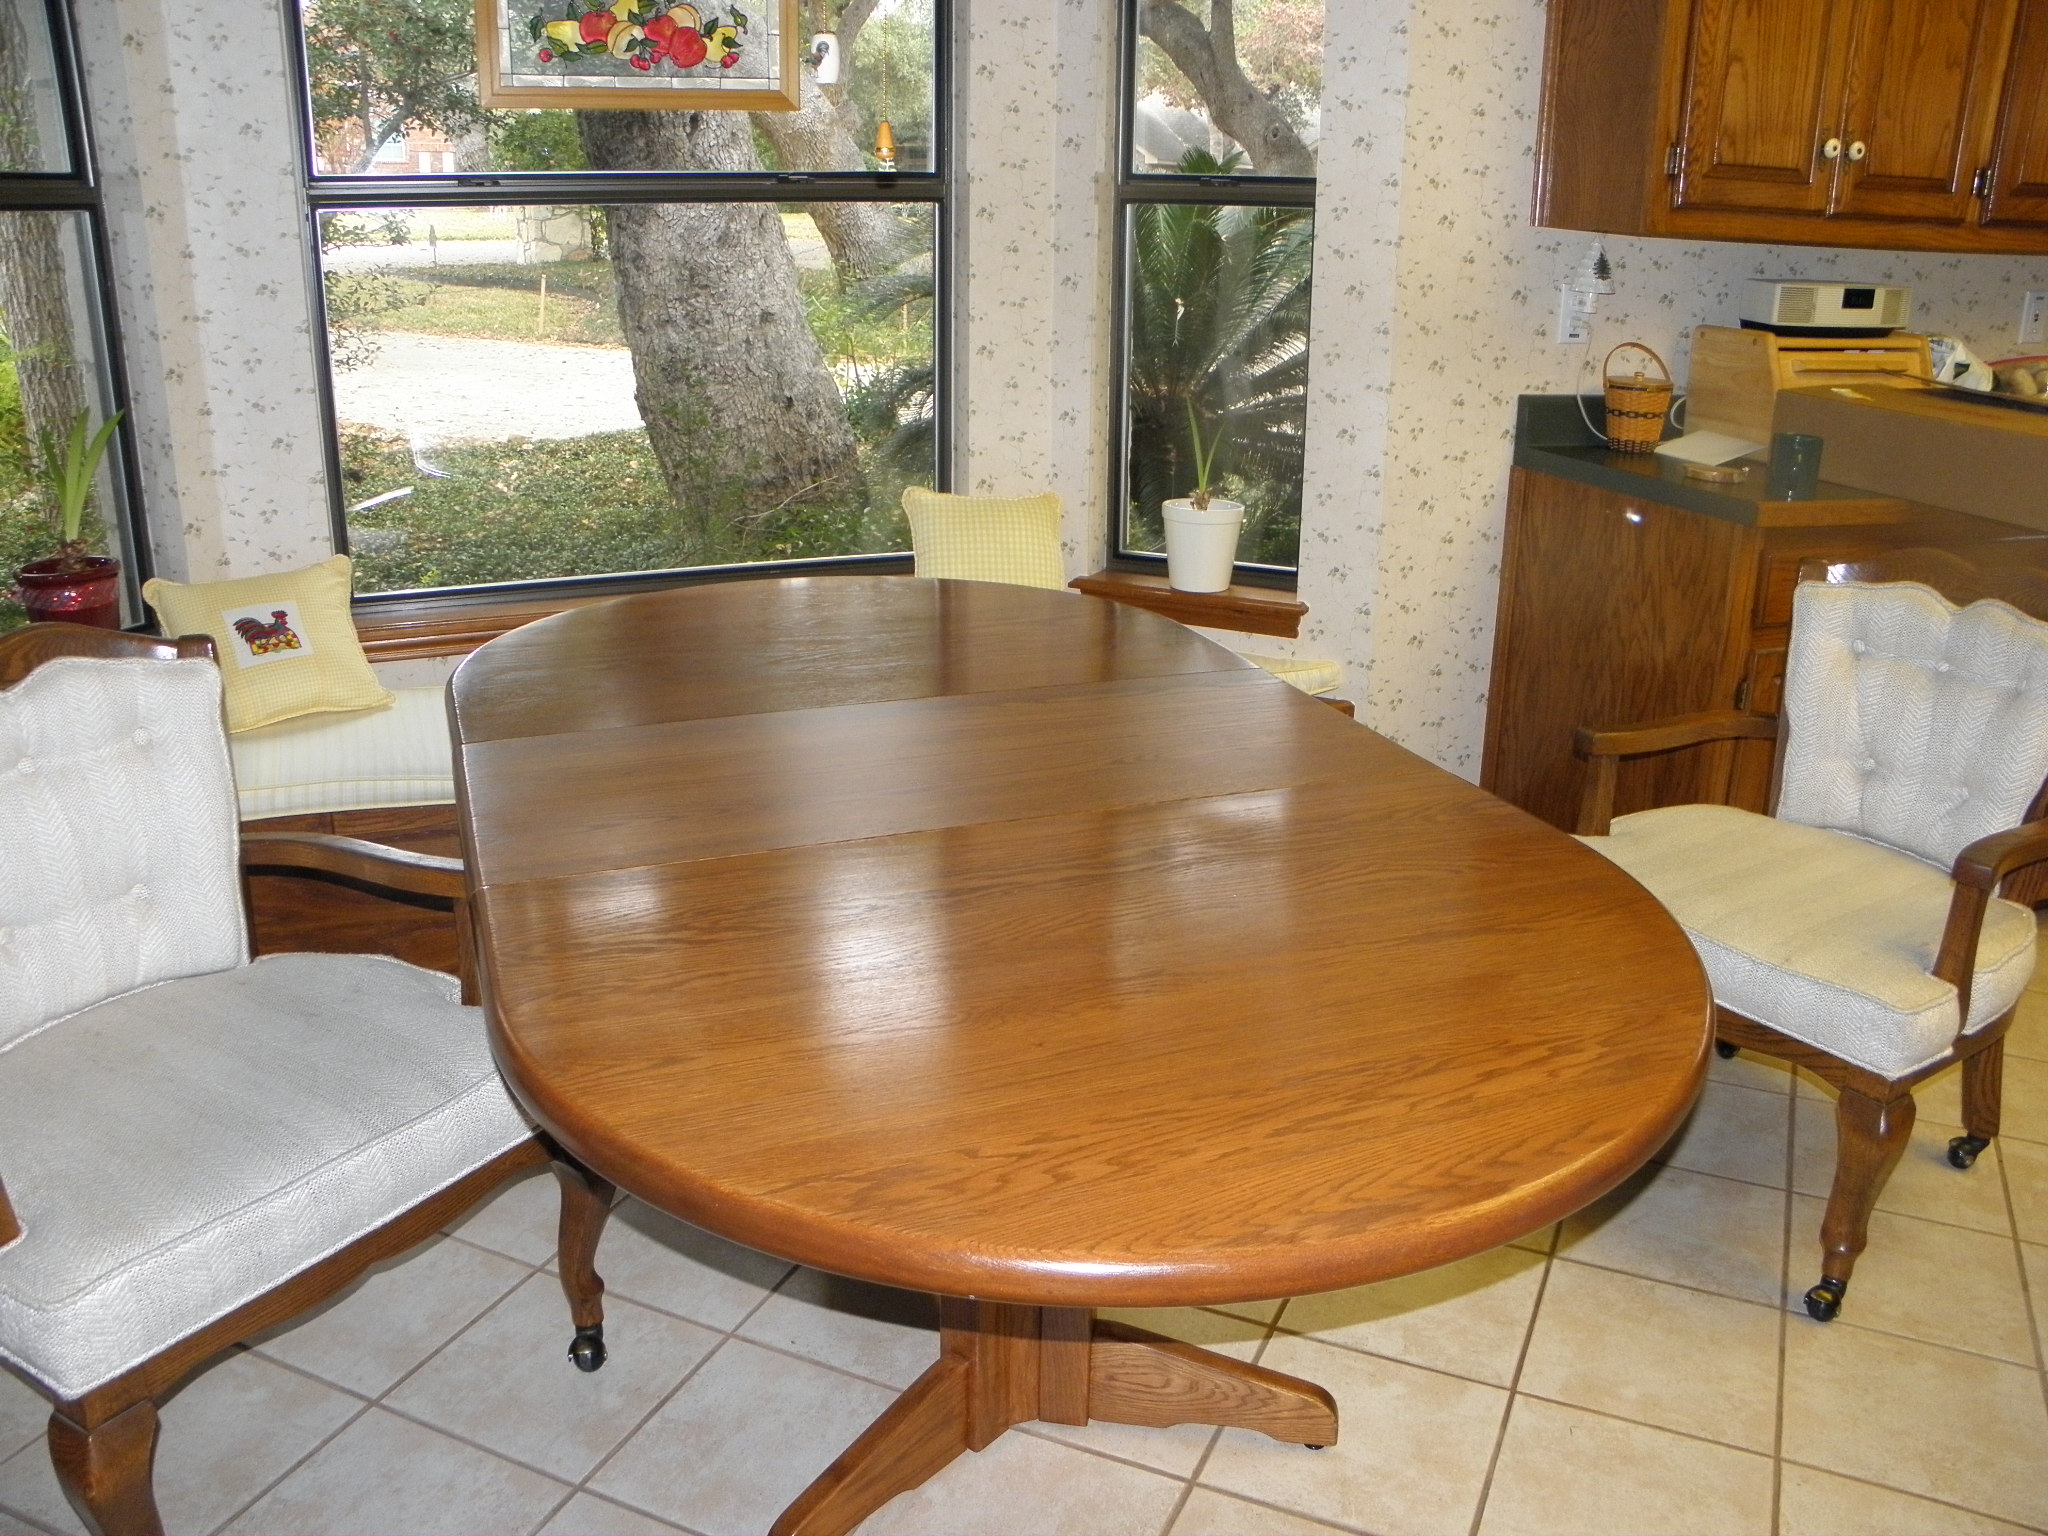 Oval kitchen table with 3 large chairs on casters